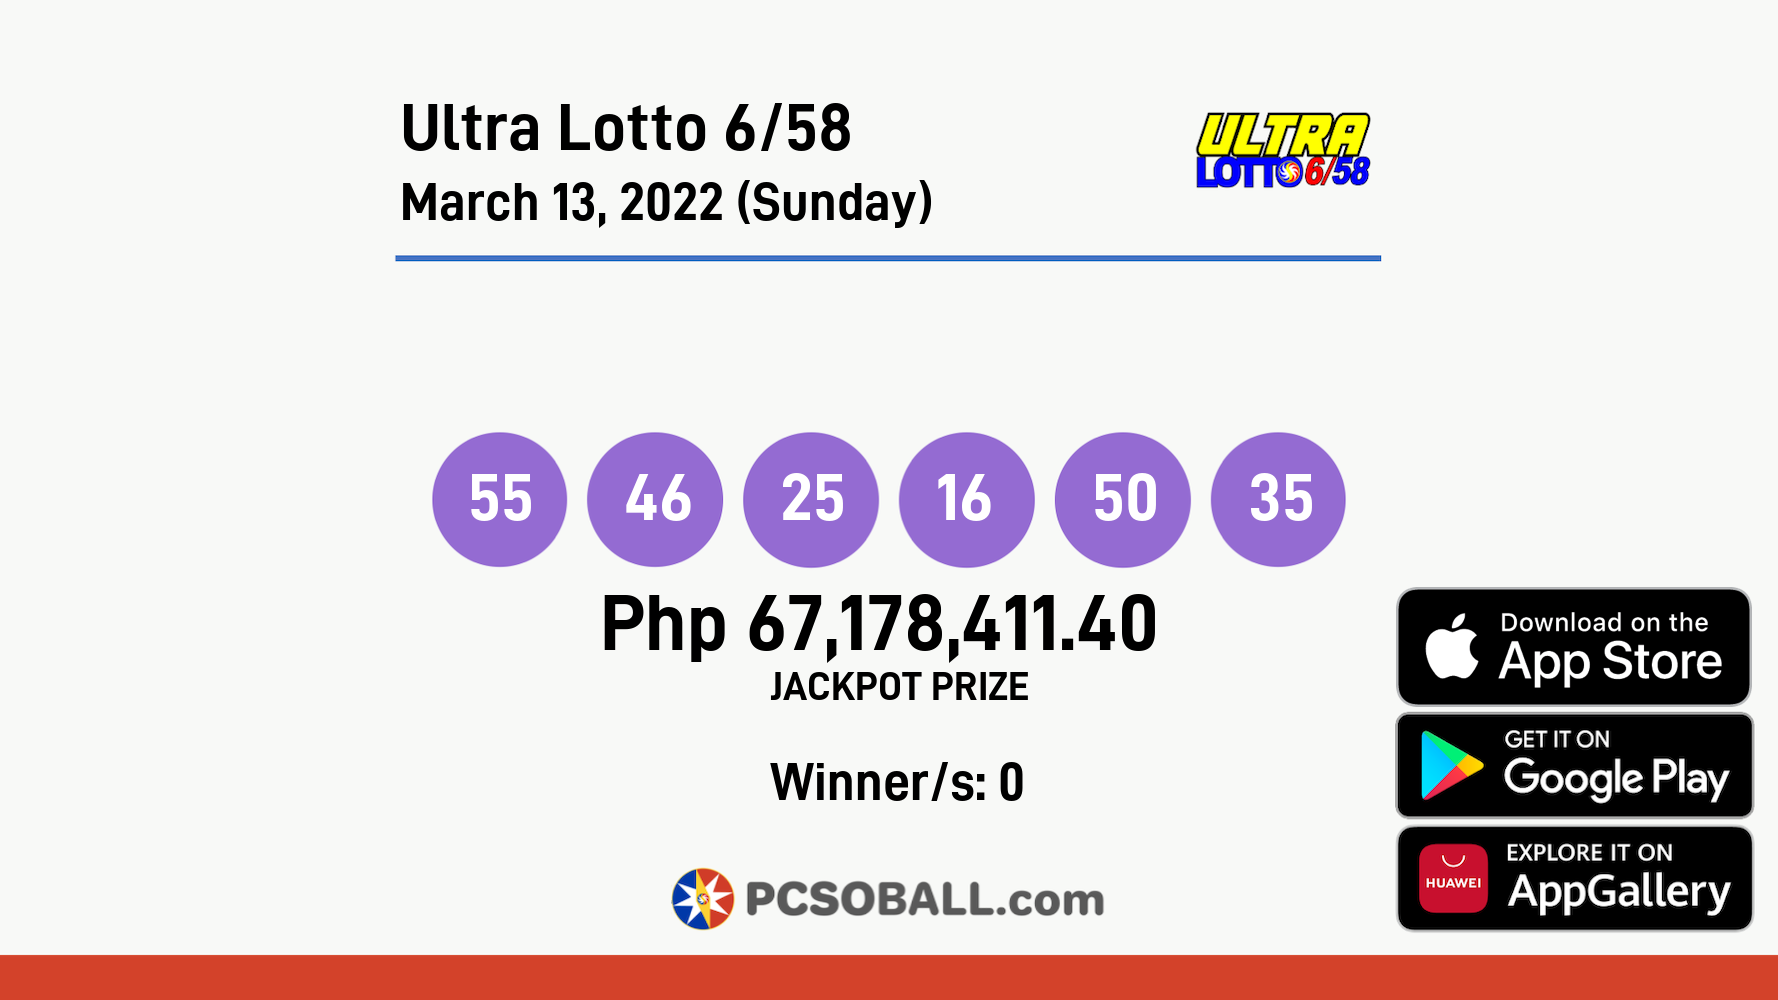 Ultra Lotto 6/58 March 13, 2022 (Sunday) Result